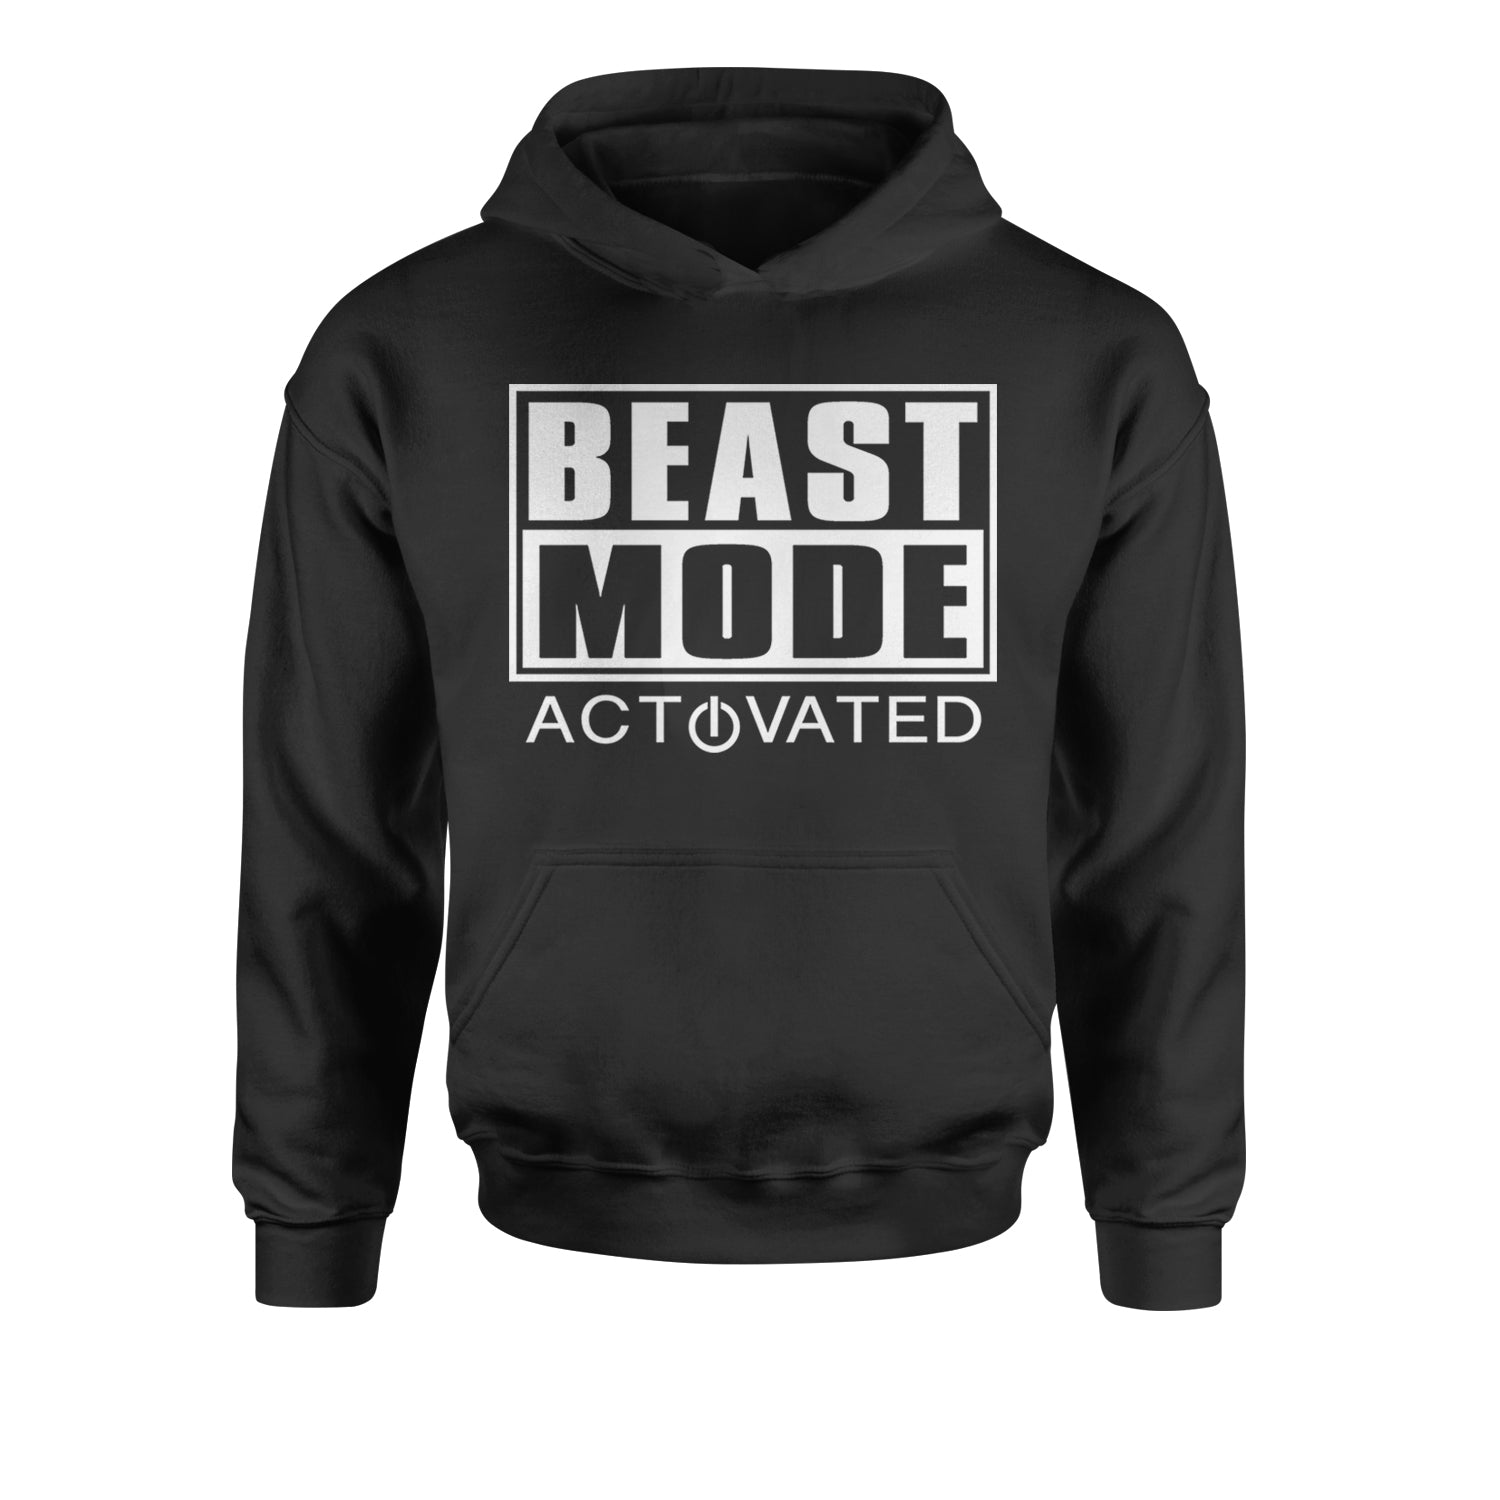 Activated Beast Mode Workout Gym Clothing Youth-Sized Hoodie